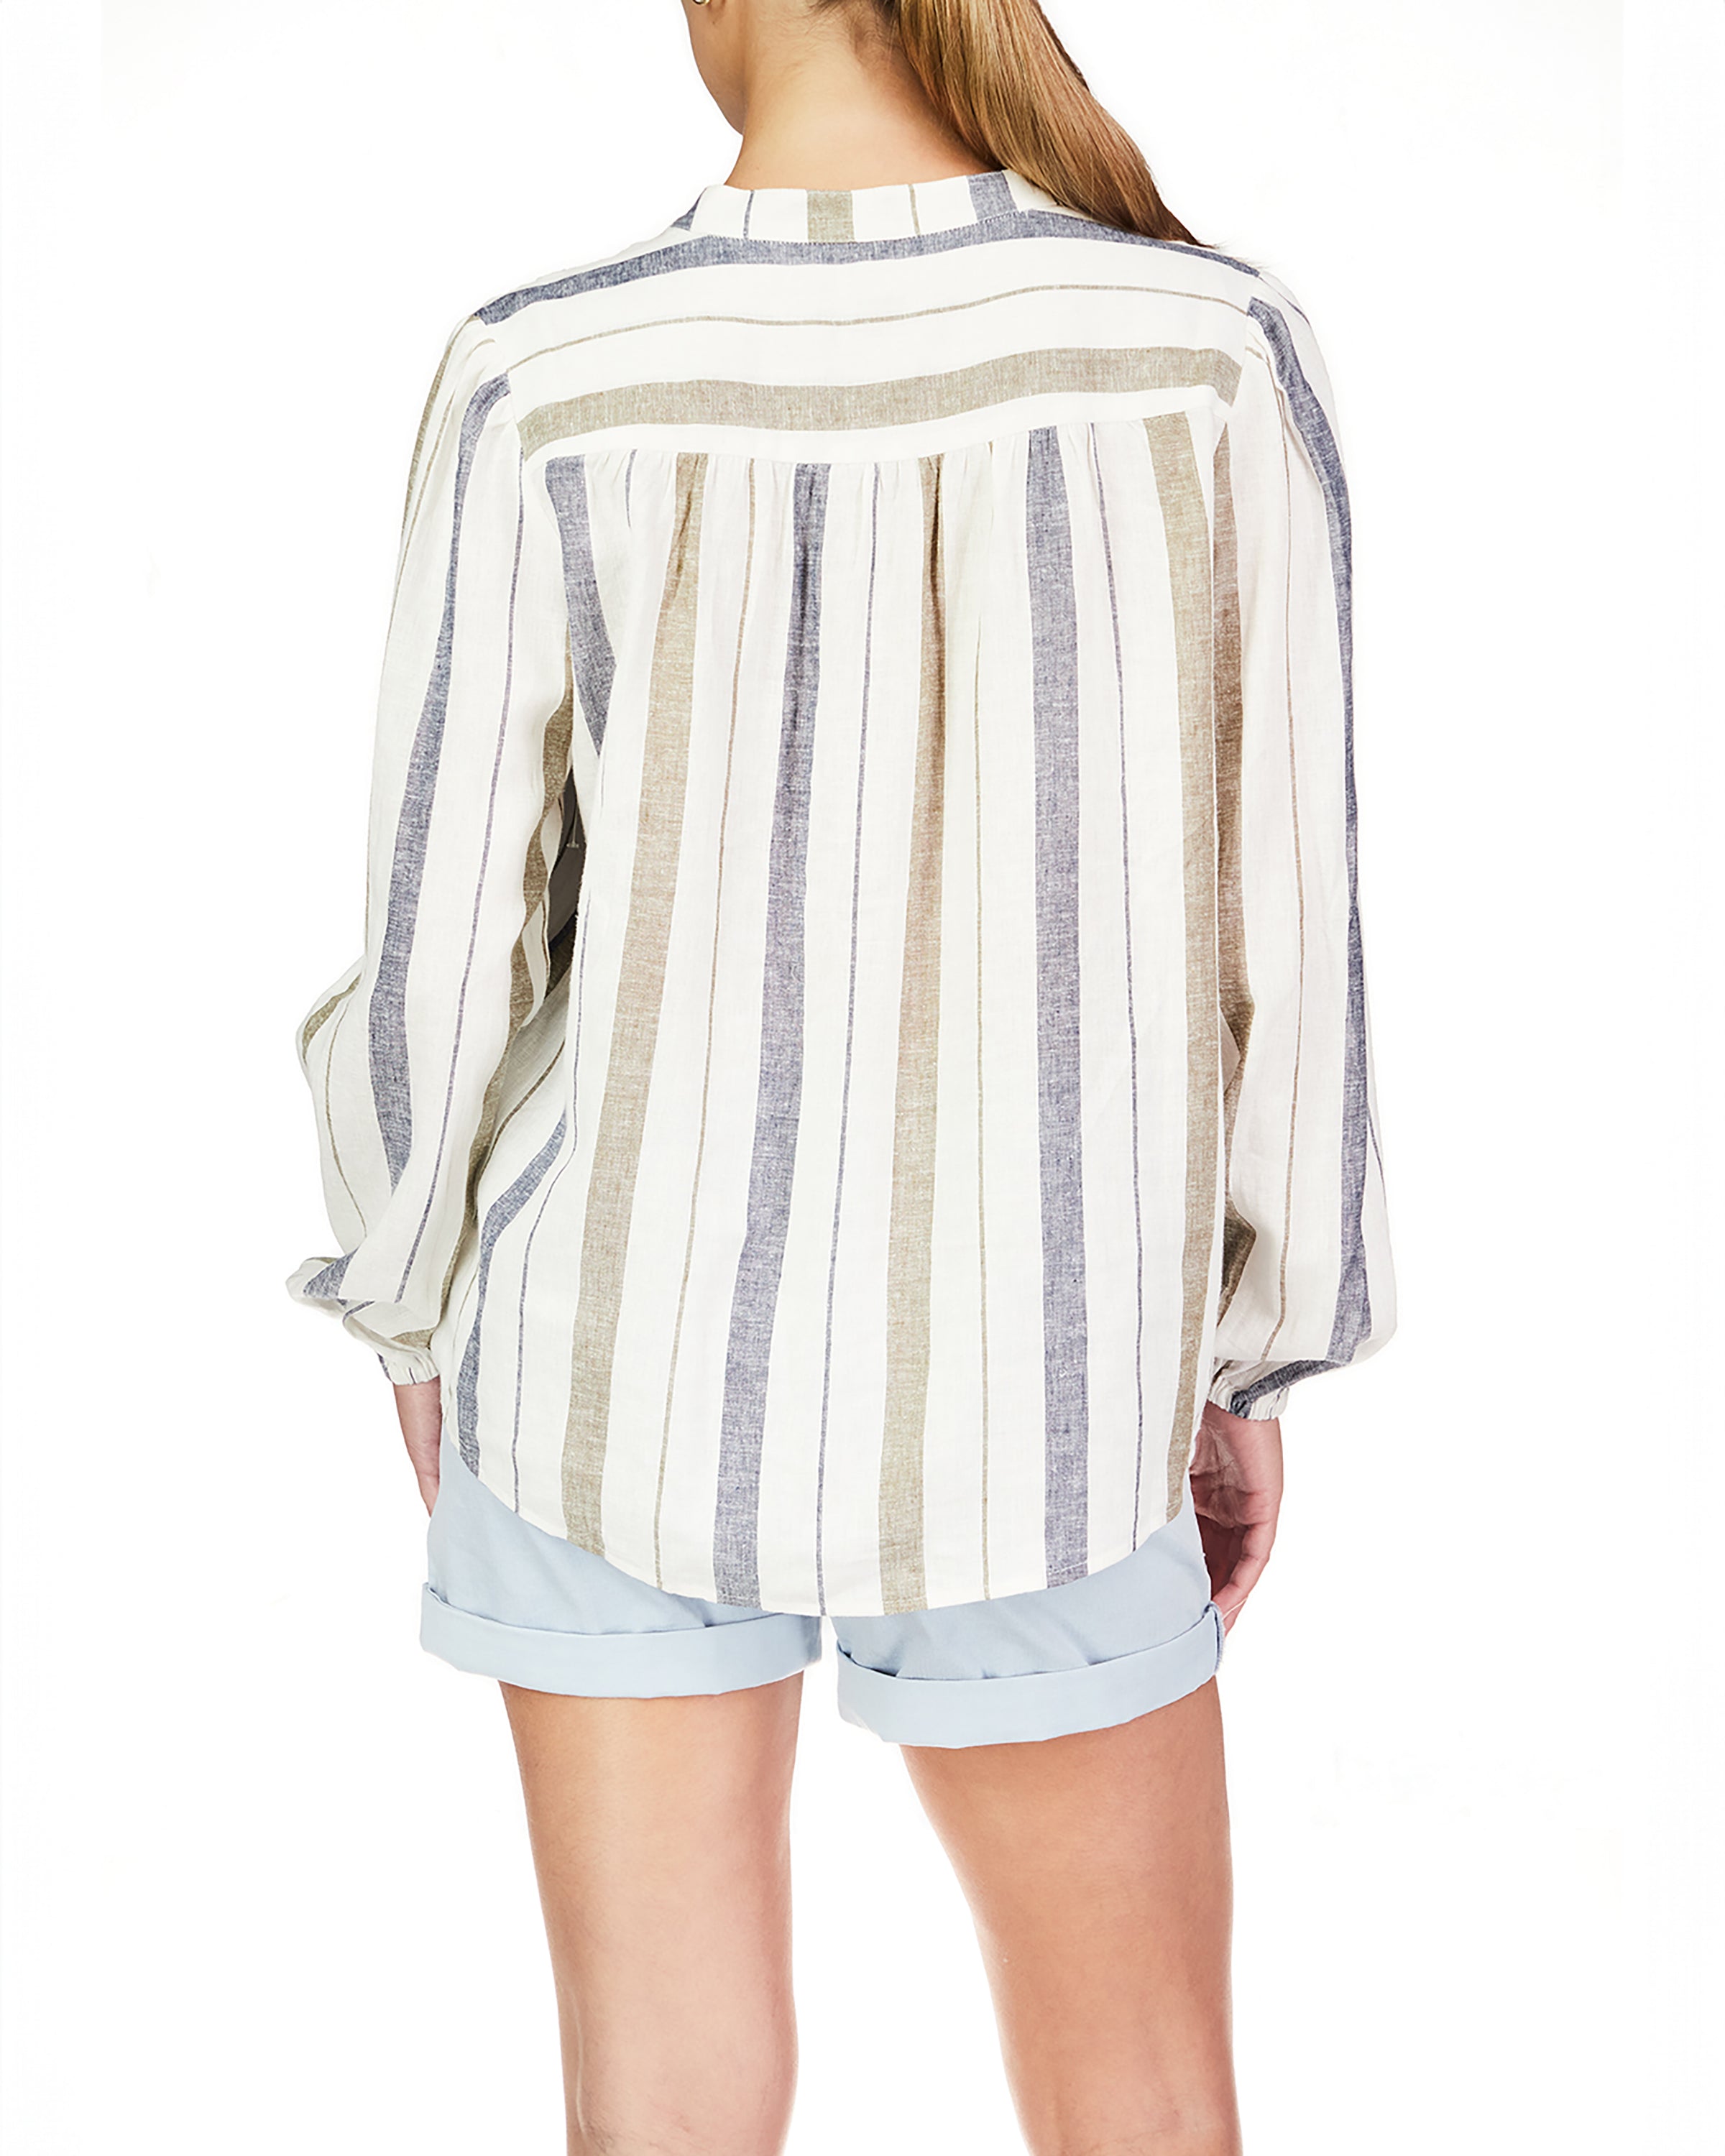 Sanctuary As You Are Button Front Top in Ocean Stripe